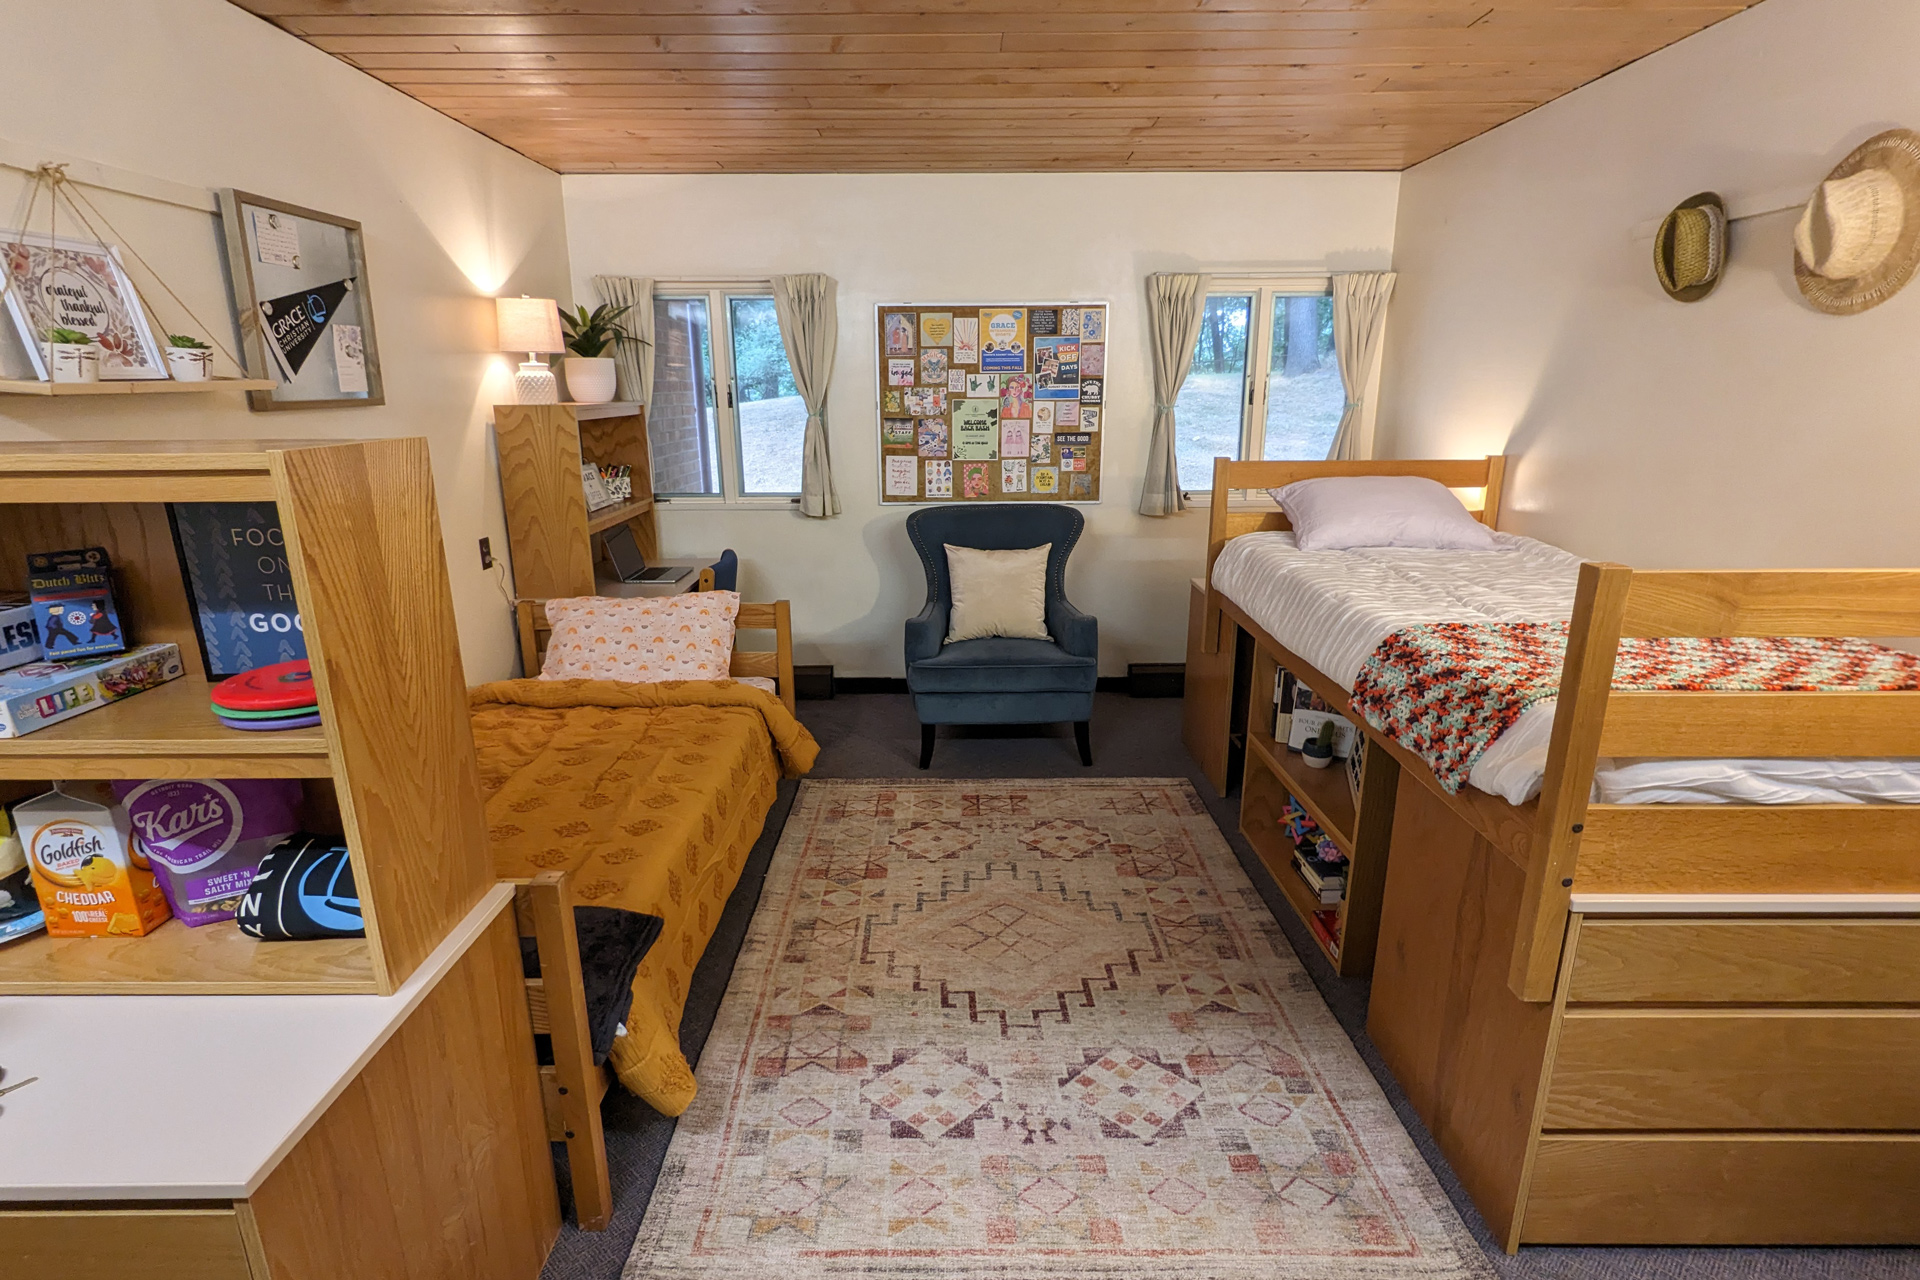 Interior view of a Dorm Room at Grace Christian University